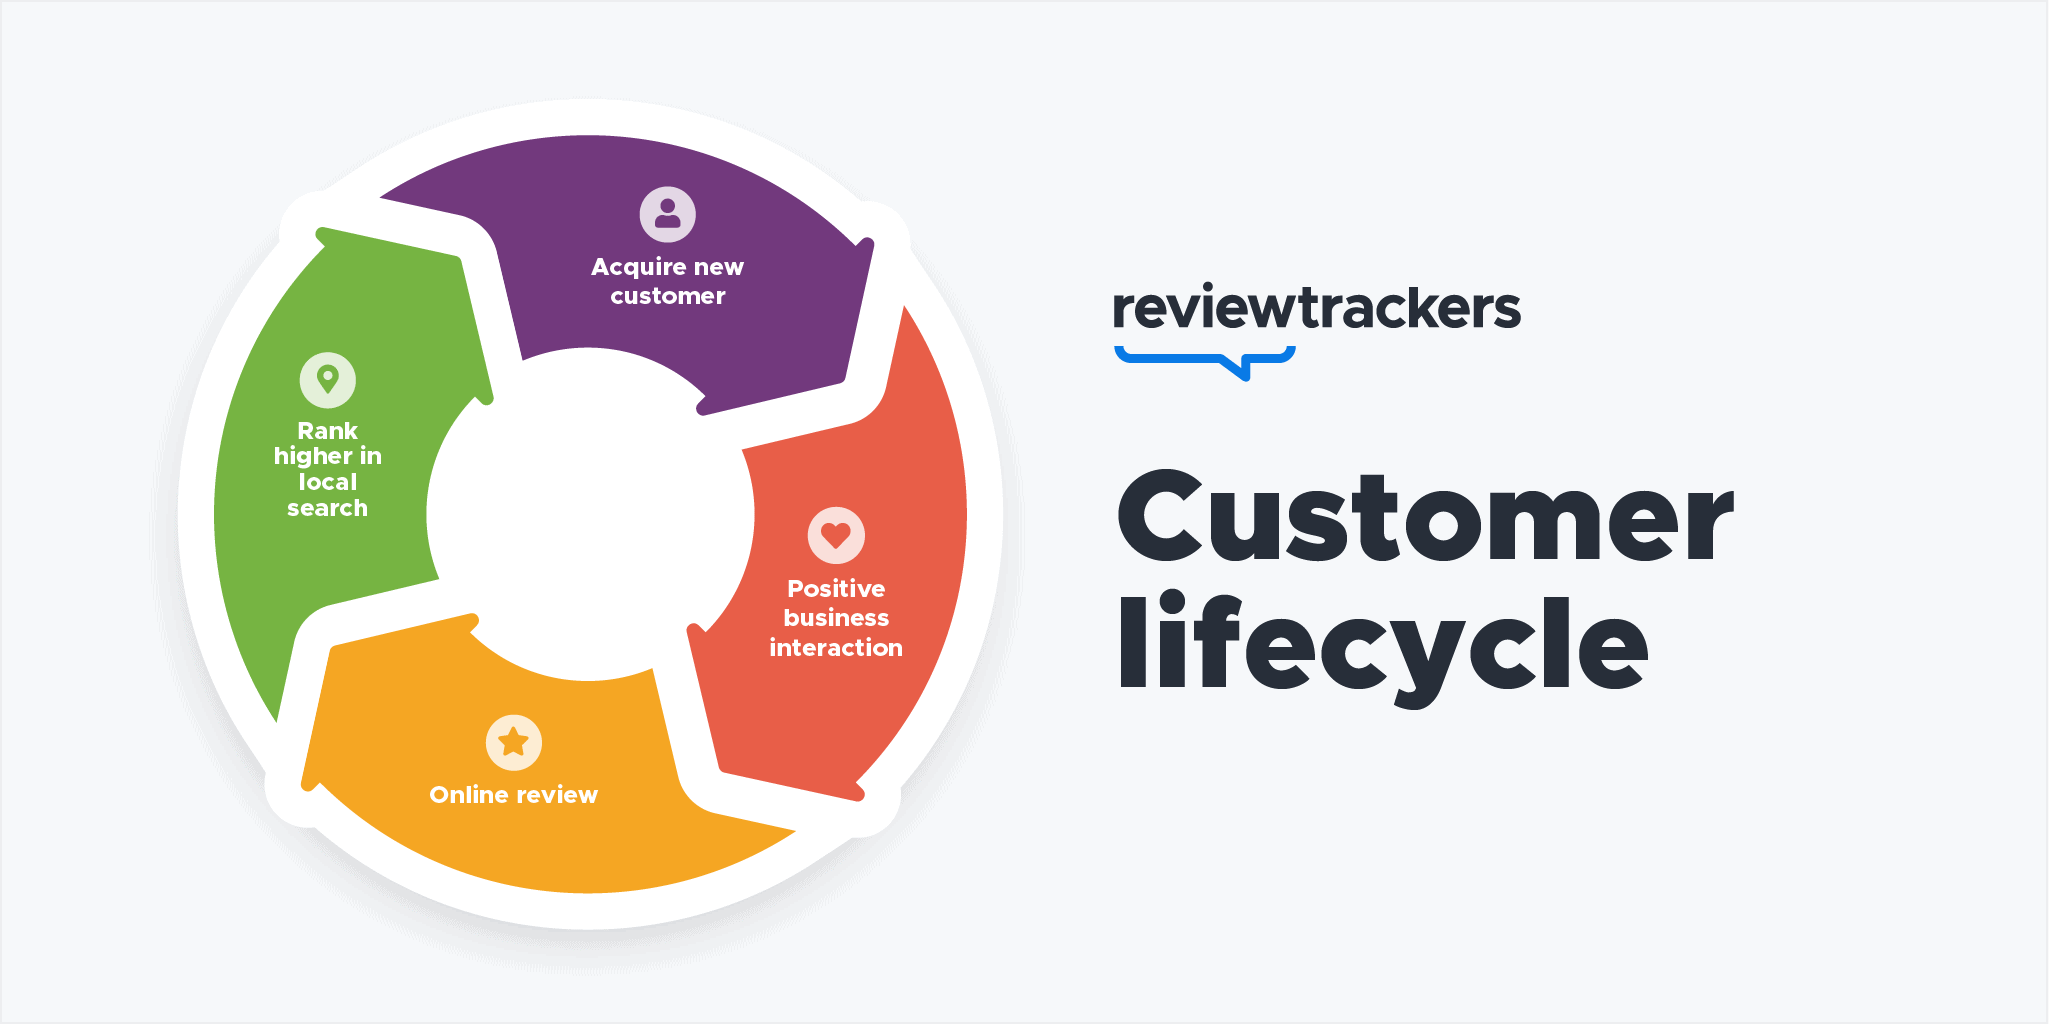 reviewtrackers customer lifecycle graphic to show the importance of local listings with reputation management